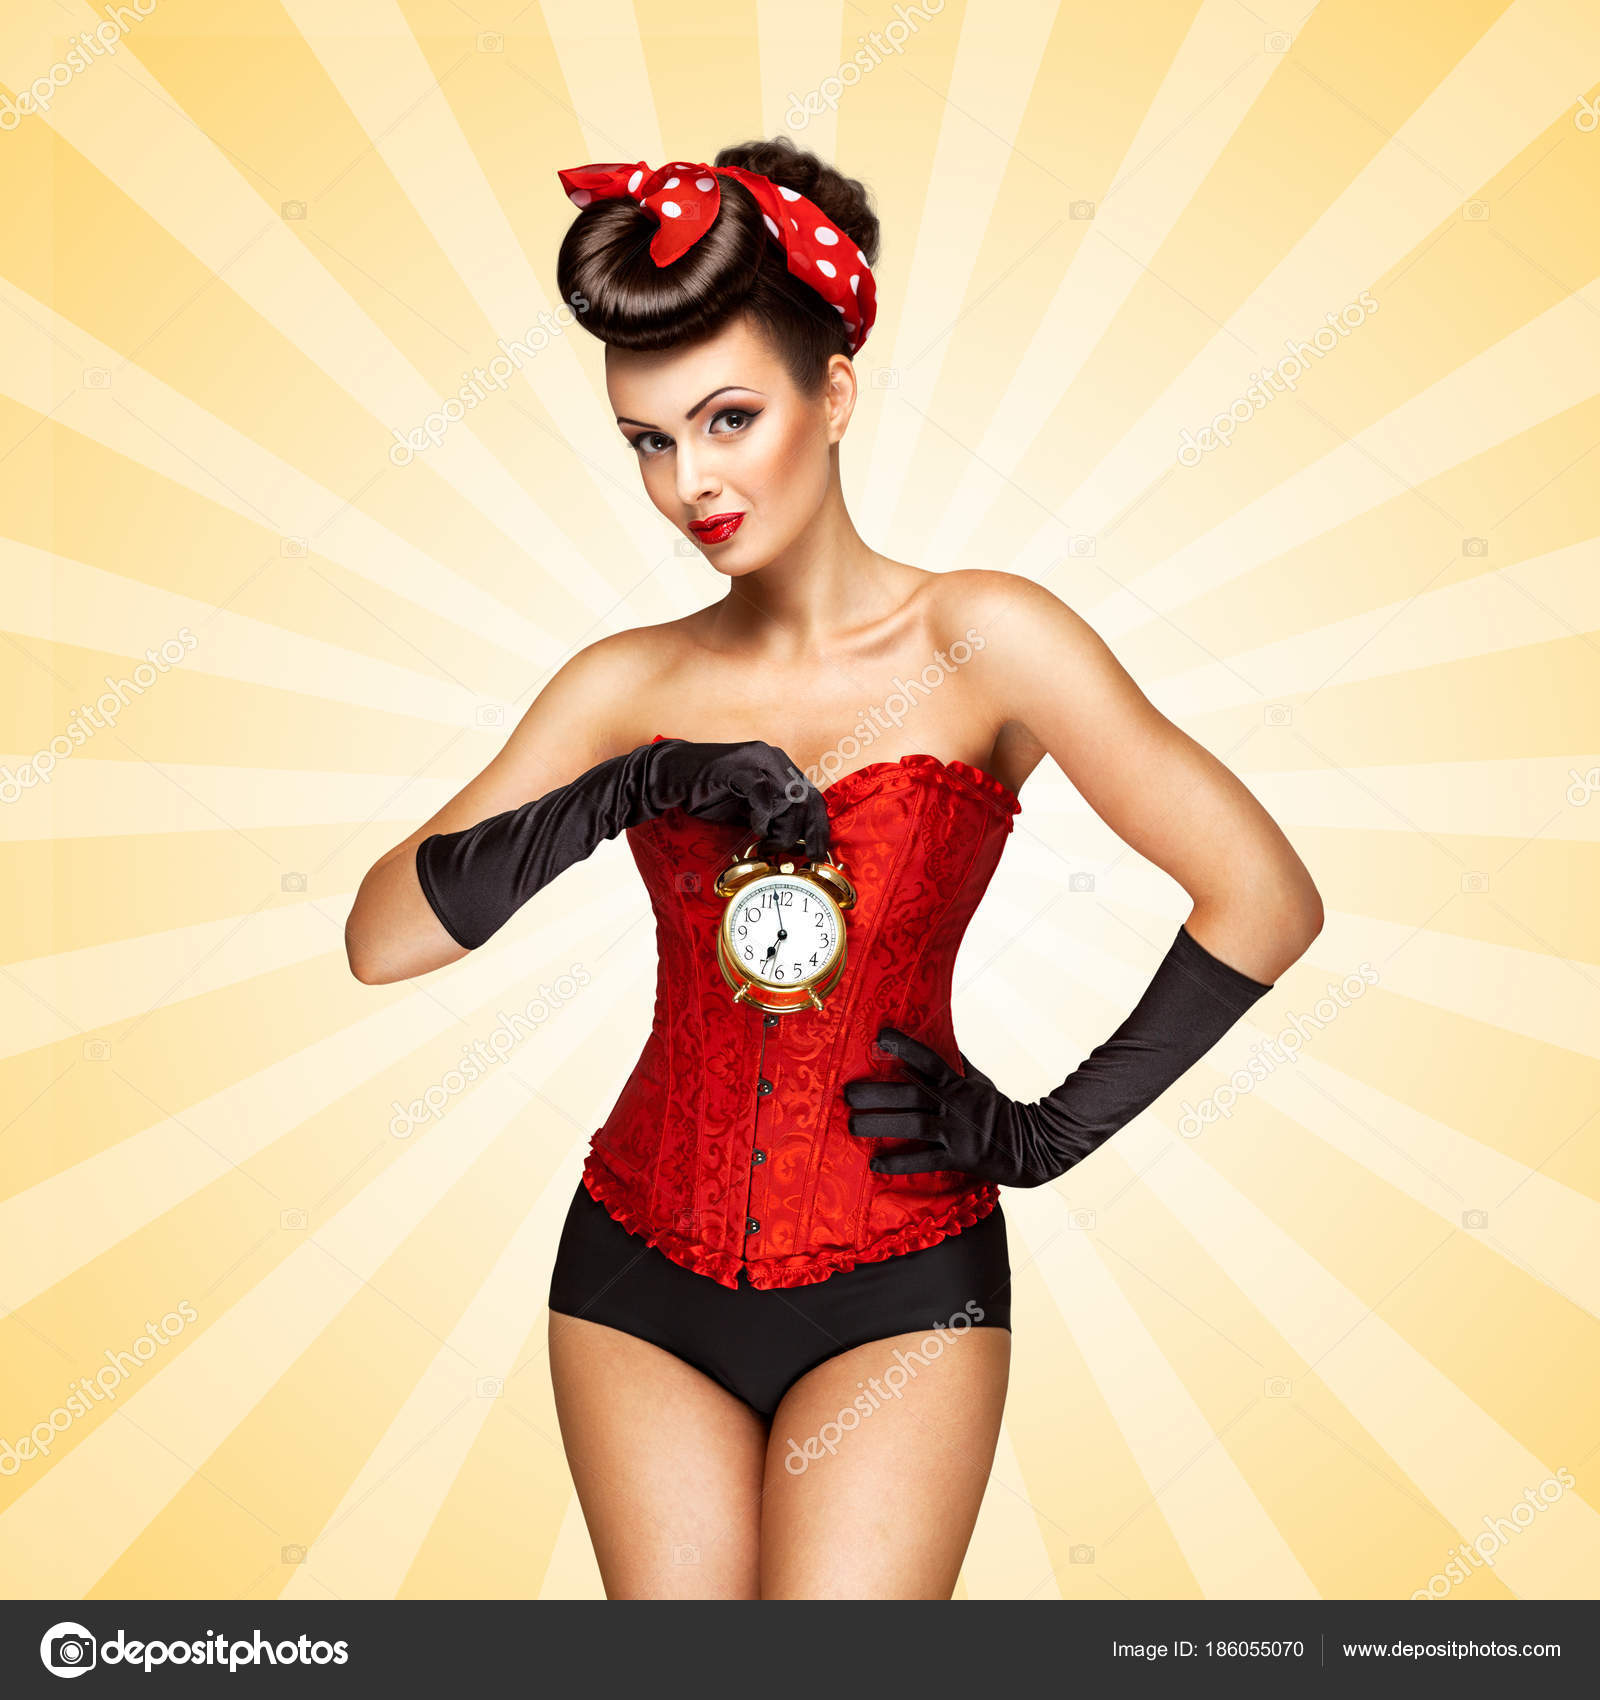 Glamorous Pinup Girl Red Vintage Corset Holding Retro Alarm Clock Stock  Photo by ©fisher.photostudio 186055070